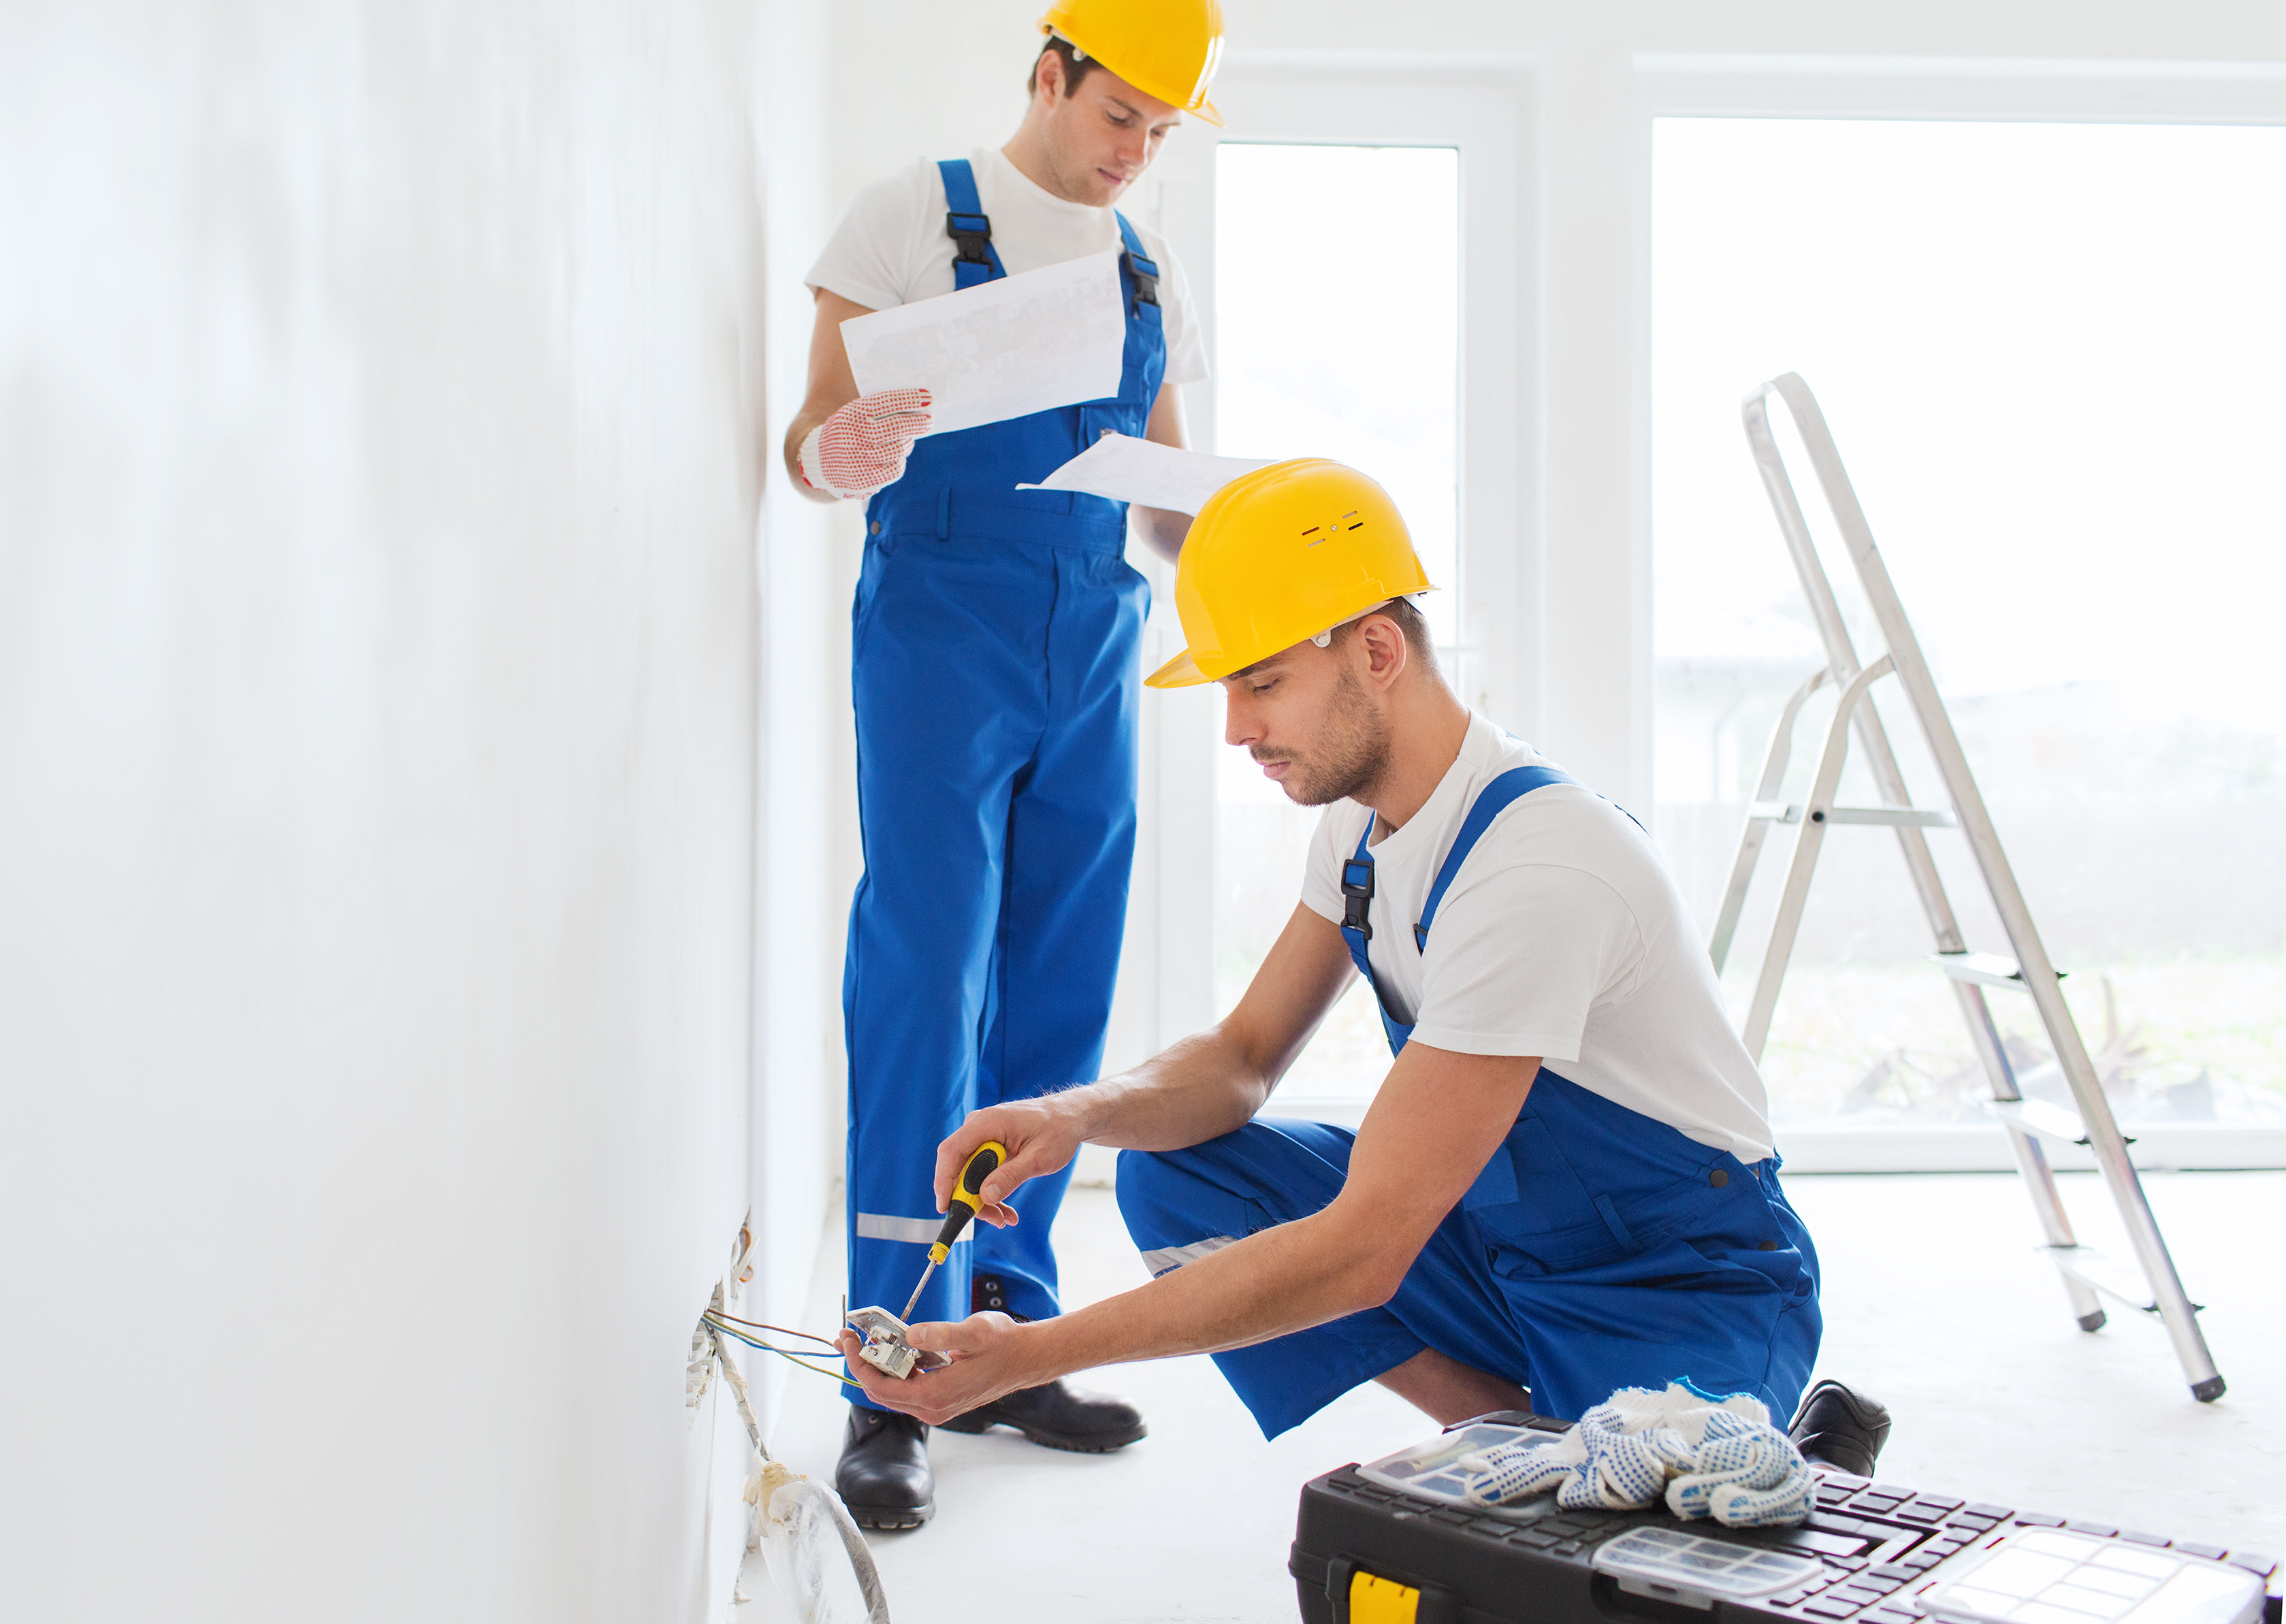 Setting Up An Electrical Repair Business At Home | InvoiceBerry Blog